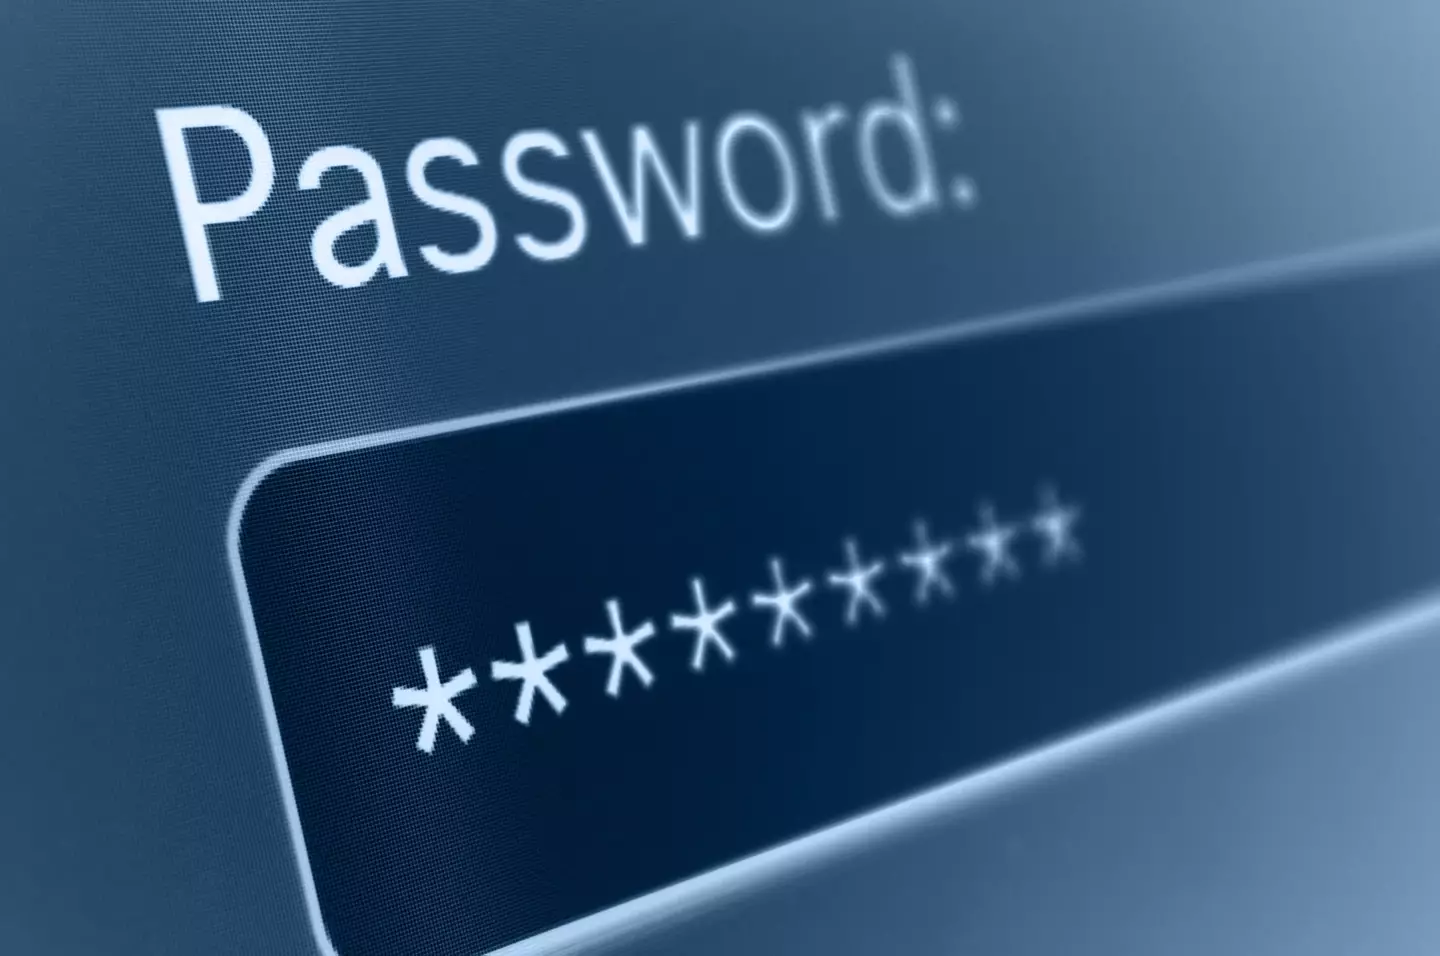 Experts have recommended using a longer password.